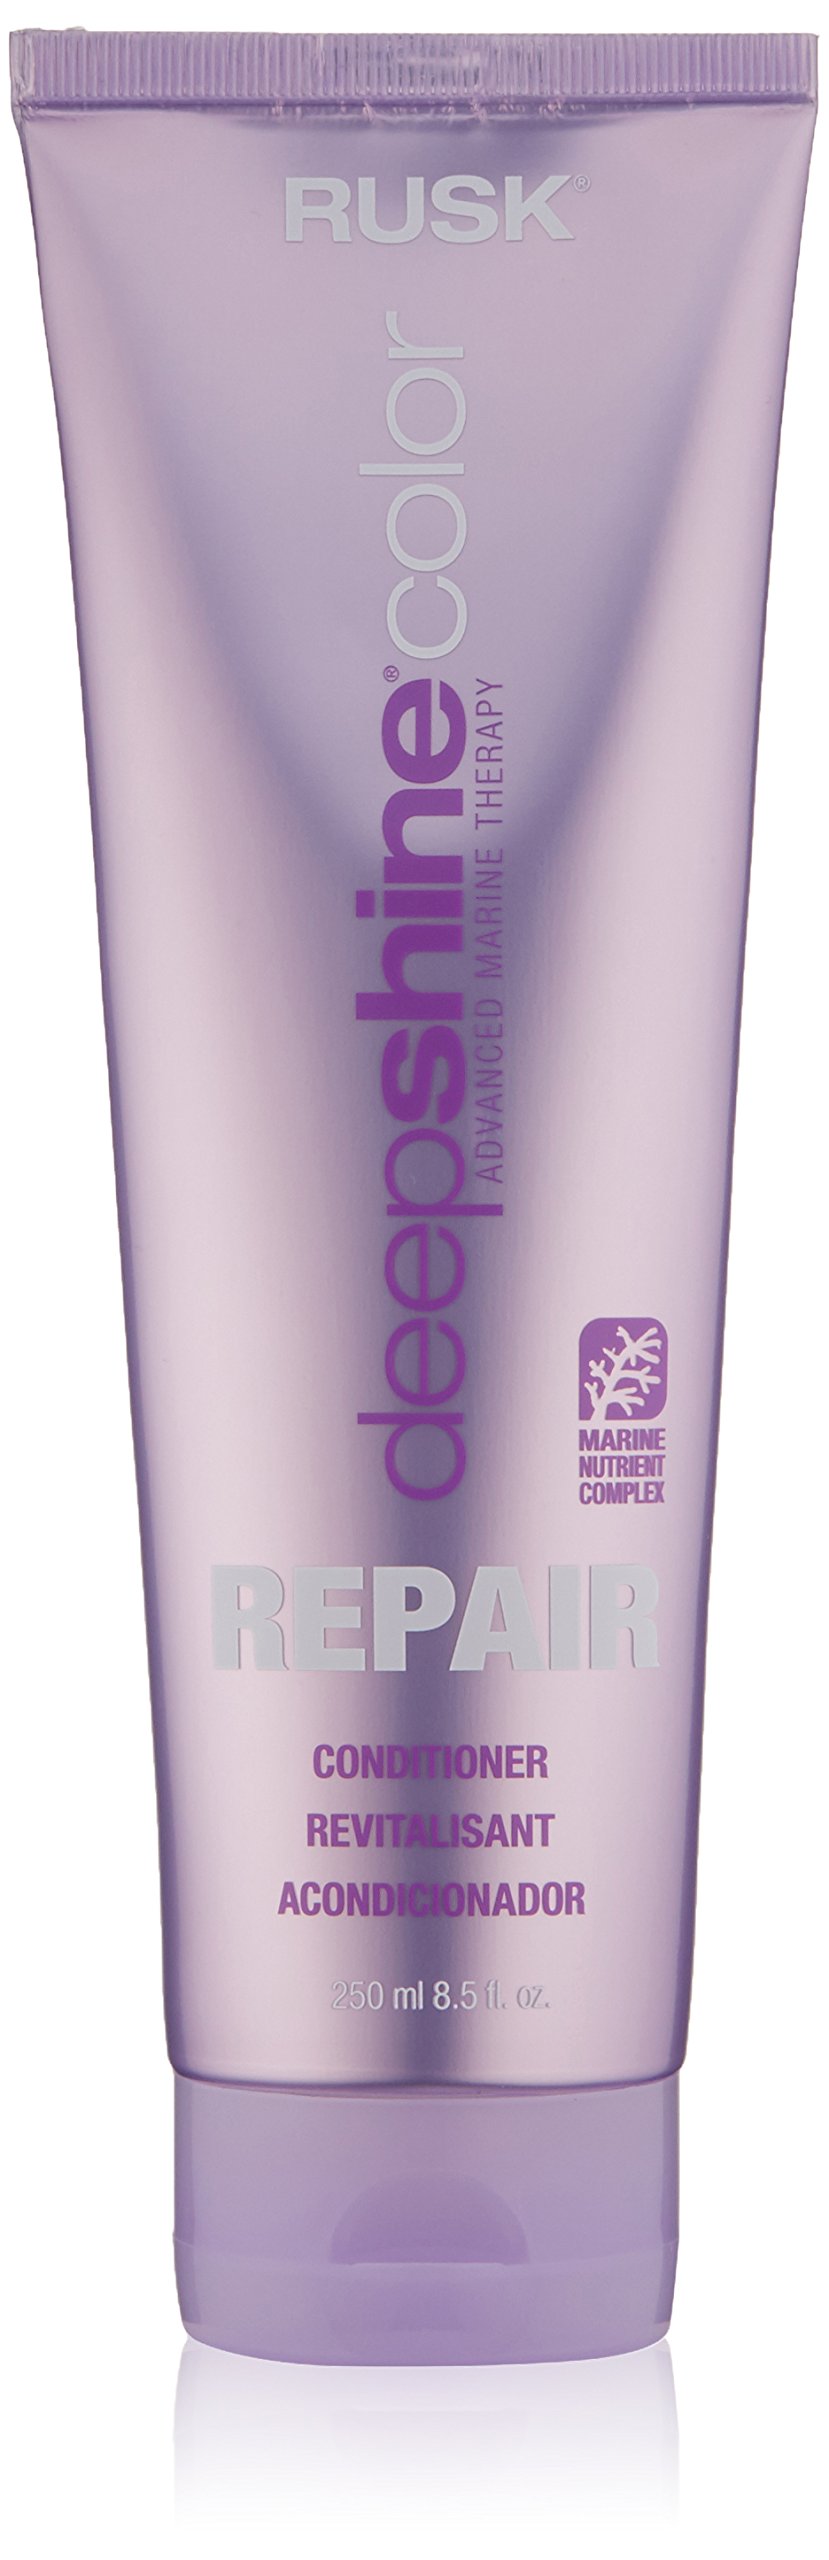 RUSK Deepshine Color Repair Conditioner, Restores Strength and Gently Detangles, Infused with Nourishing Marine Botanicals, and UV-Absorbing Technology to Protect Color